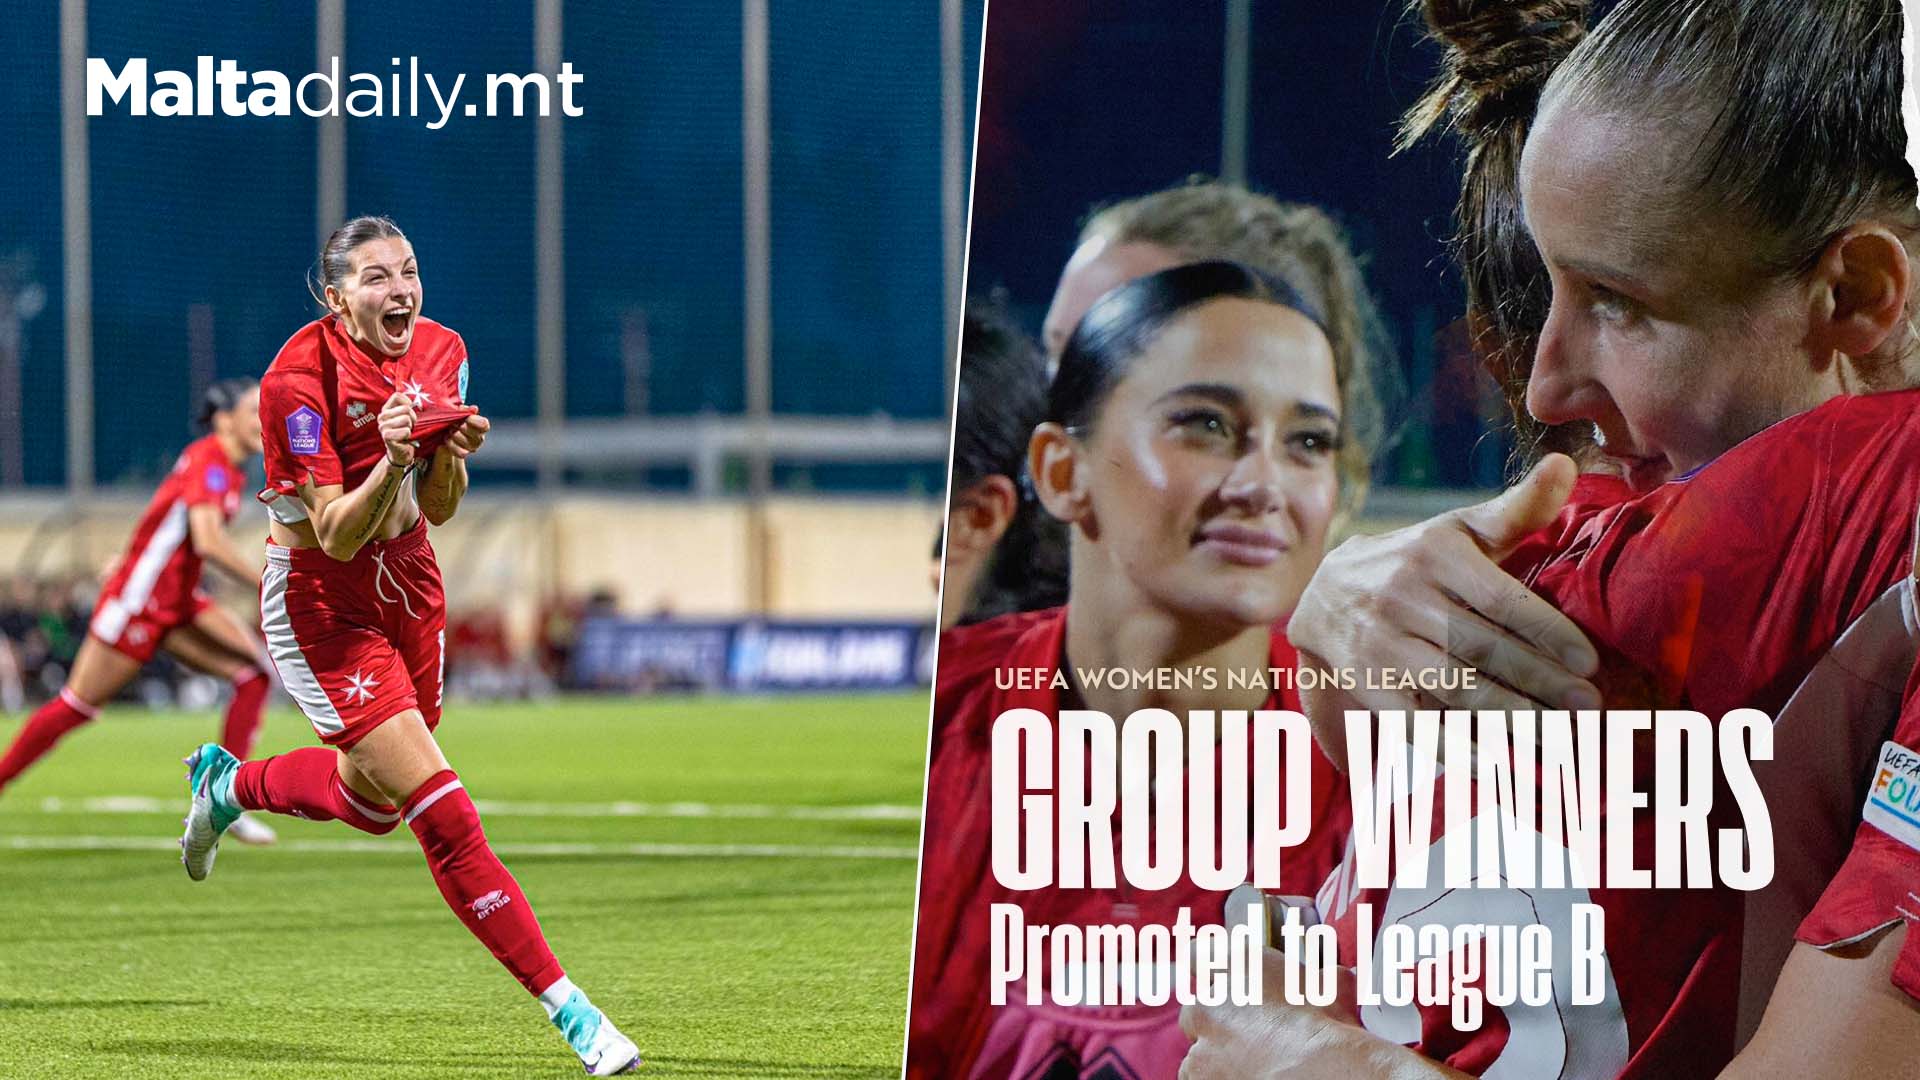 Malta’s Women Team Makes History: Promoted To League B